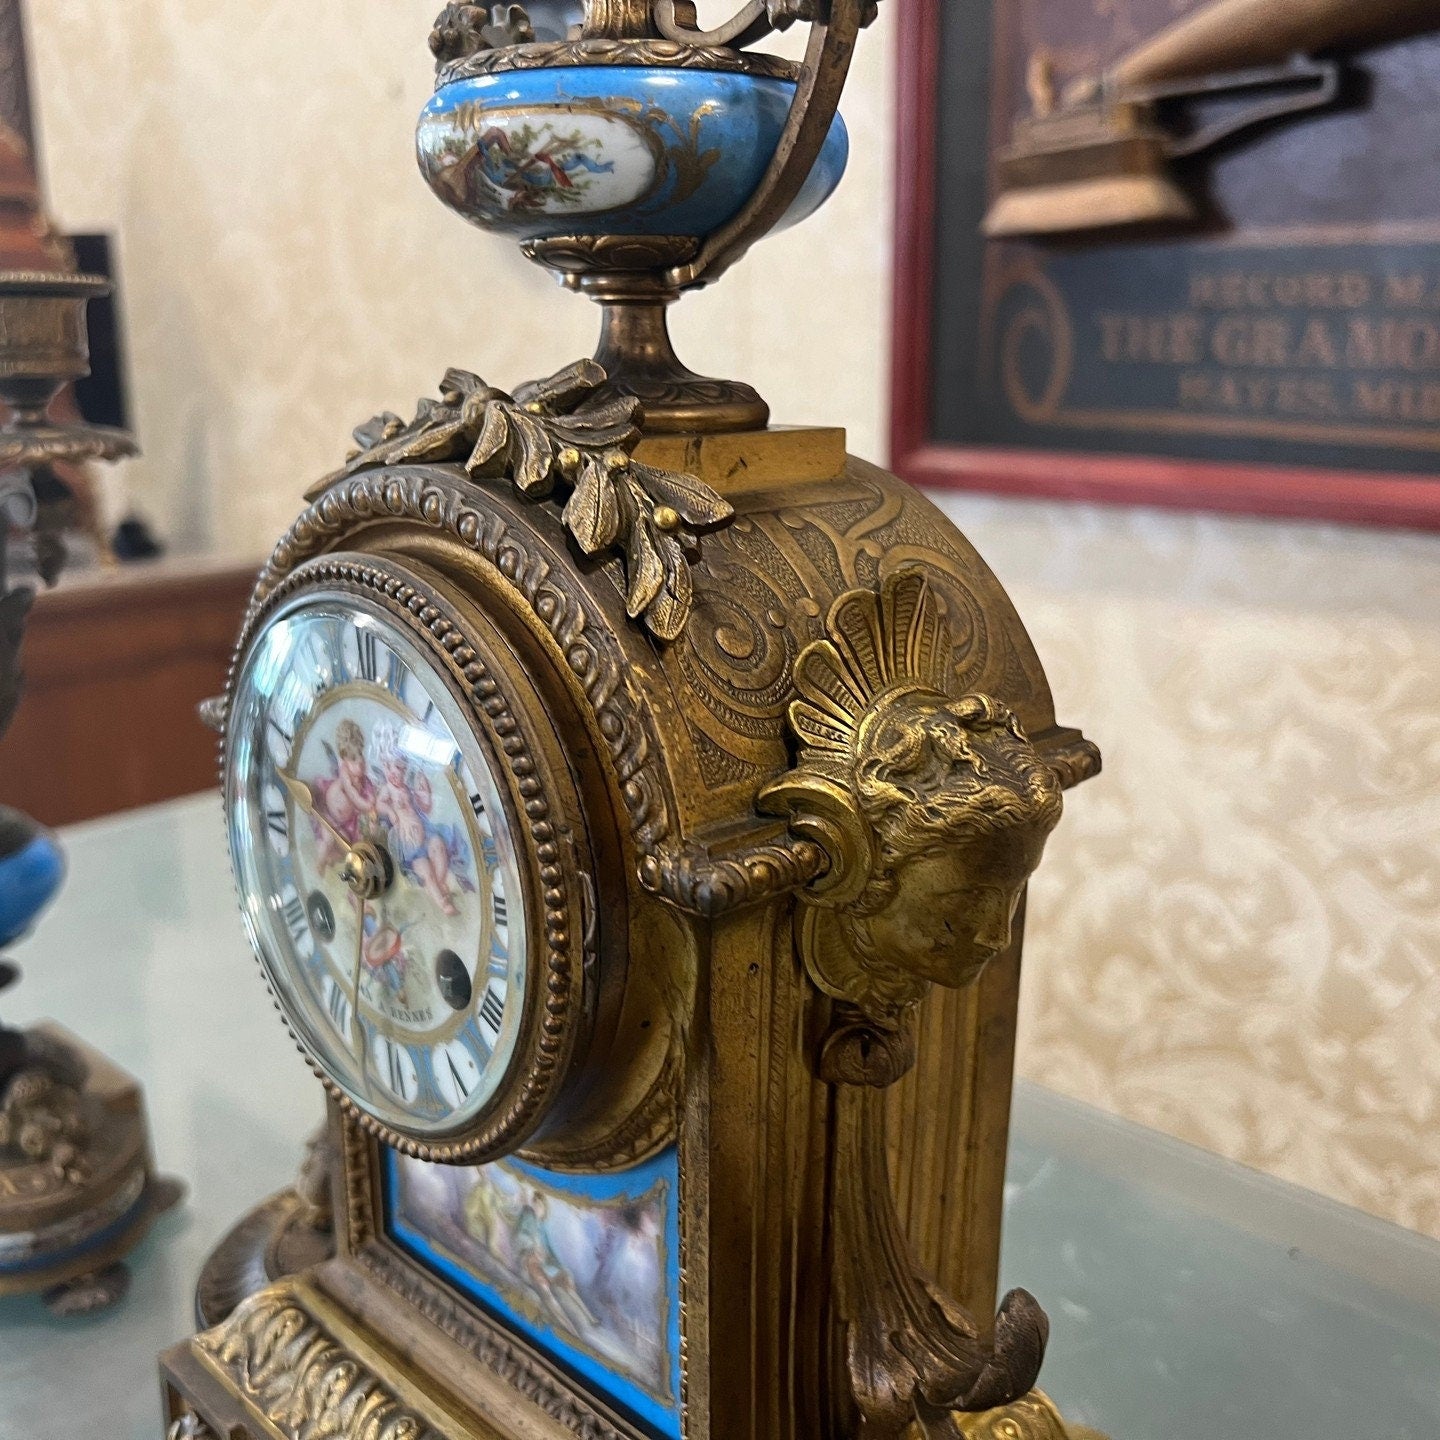 Collectible Antique French Bronze Mantel Clock - Porcelain Dial and Details, Stunning Visuals, Perfect Condition, Fully Functional